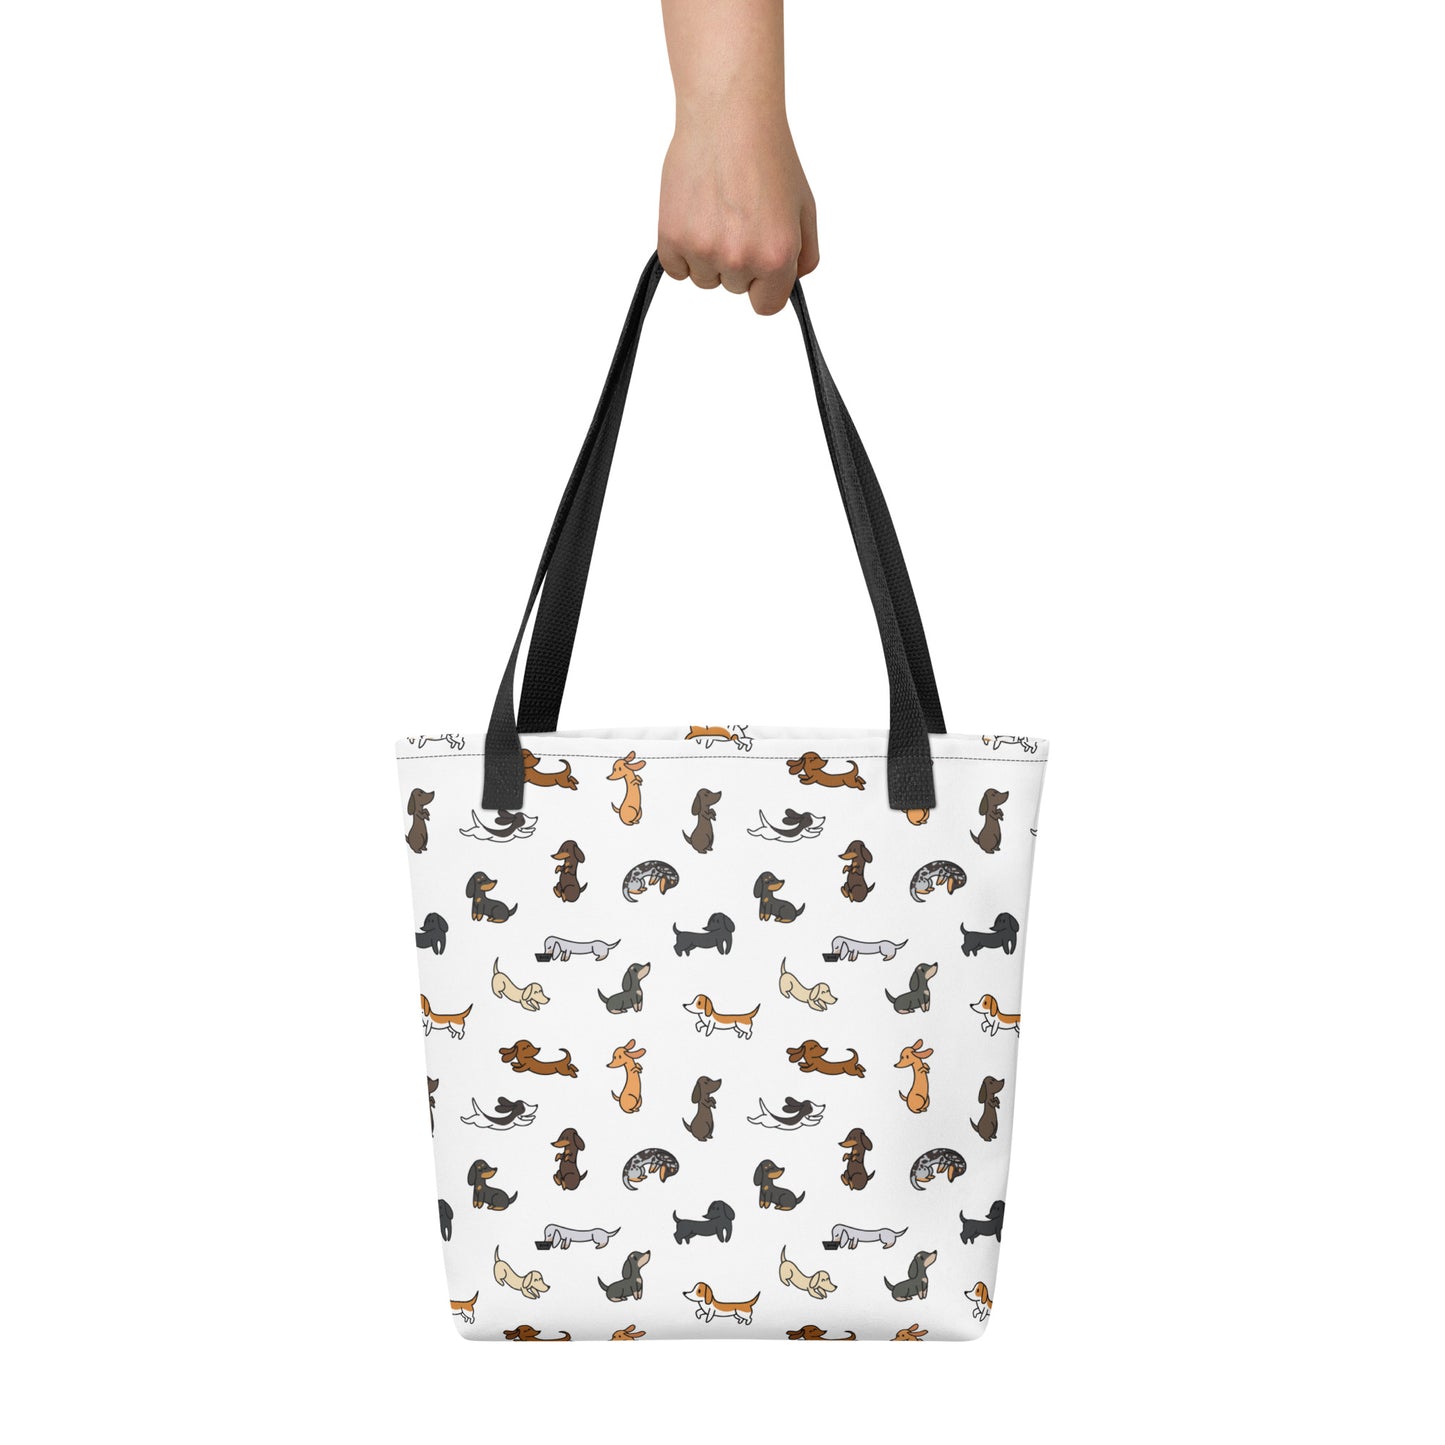 Cute Dachshunds Patterned Tote Bag